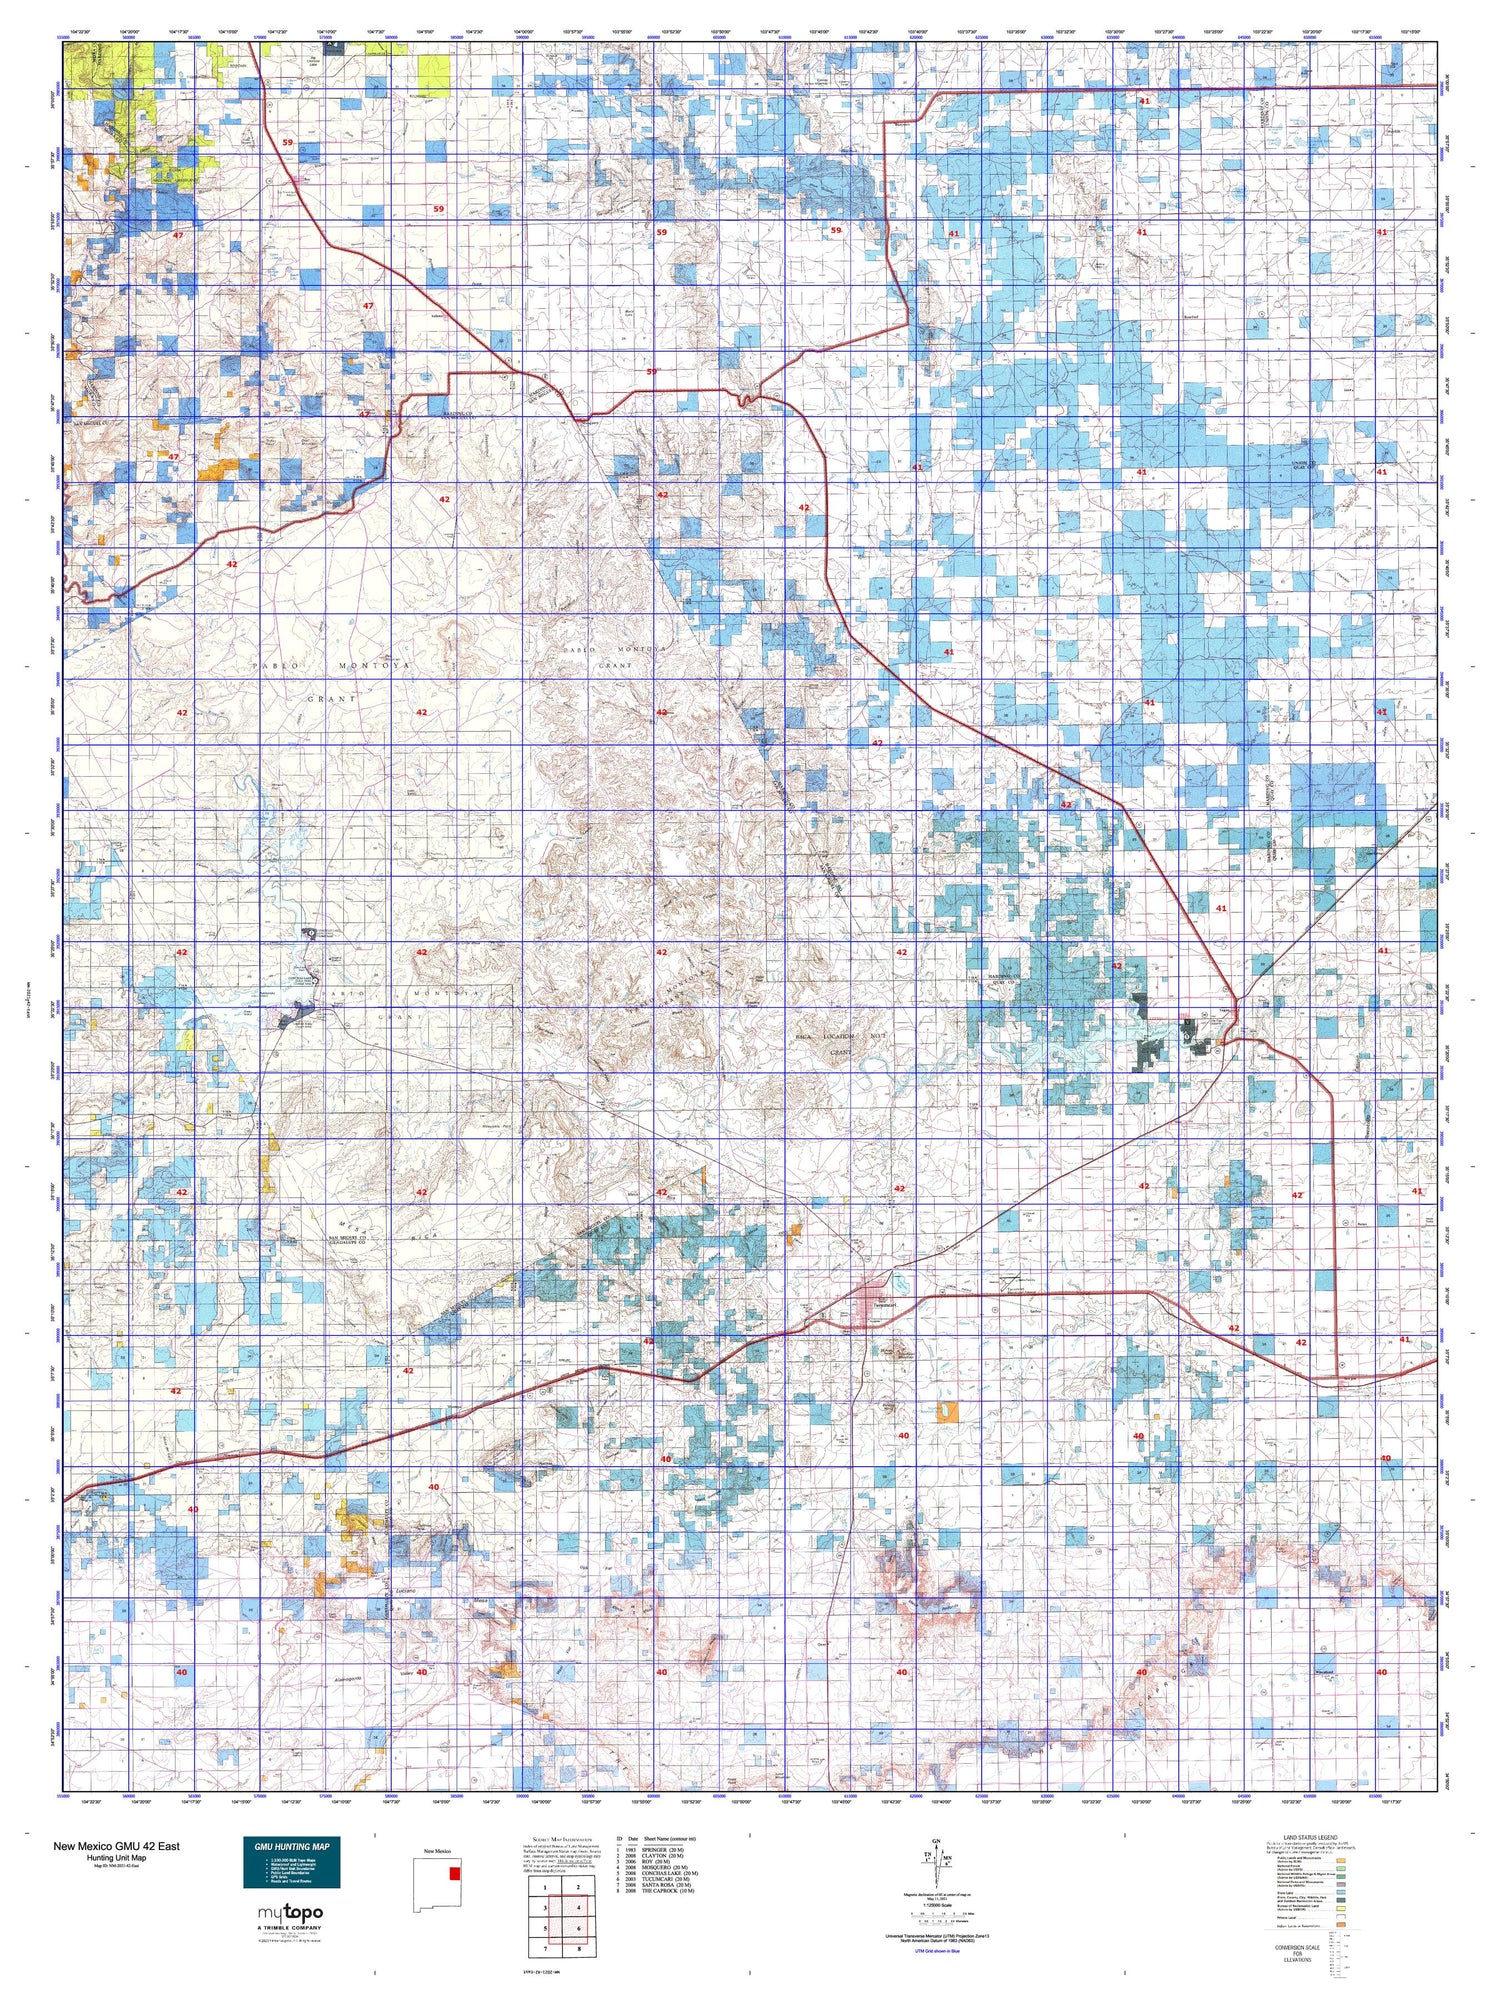 New Mexico GMU 42 East Map Image